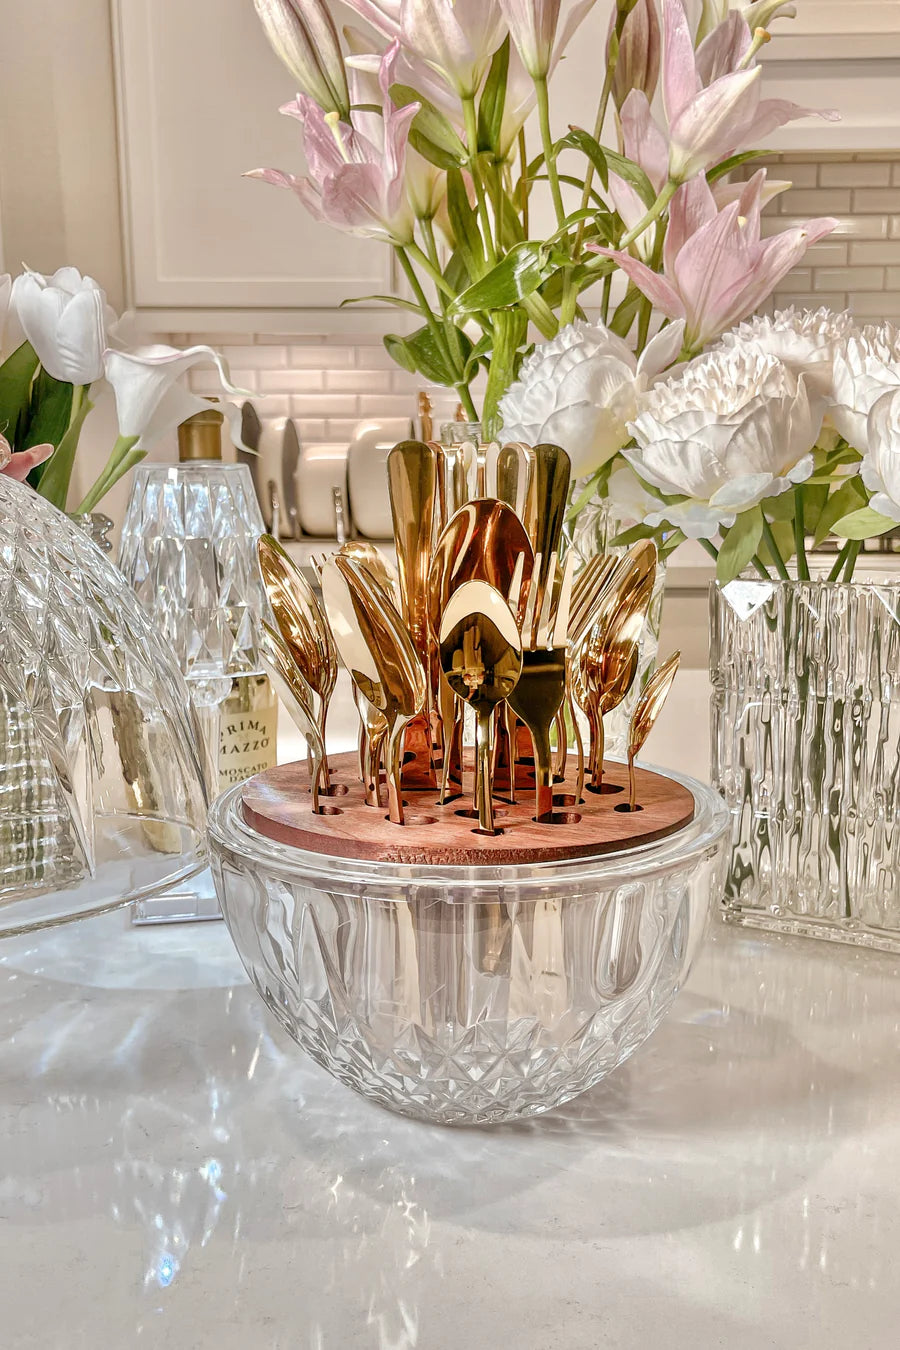 ROYAL LUXURIOUS CRYSTAL CUTLERY & UTENSIL HOLDER + COMPLIMENTARY 24PC STAINLESS STEEL CUTLERY SET